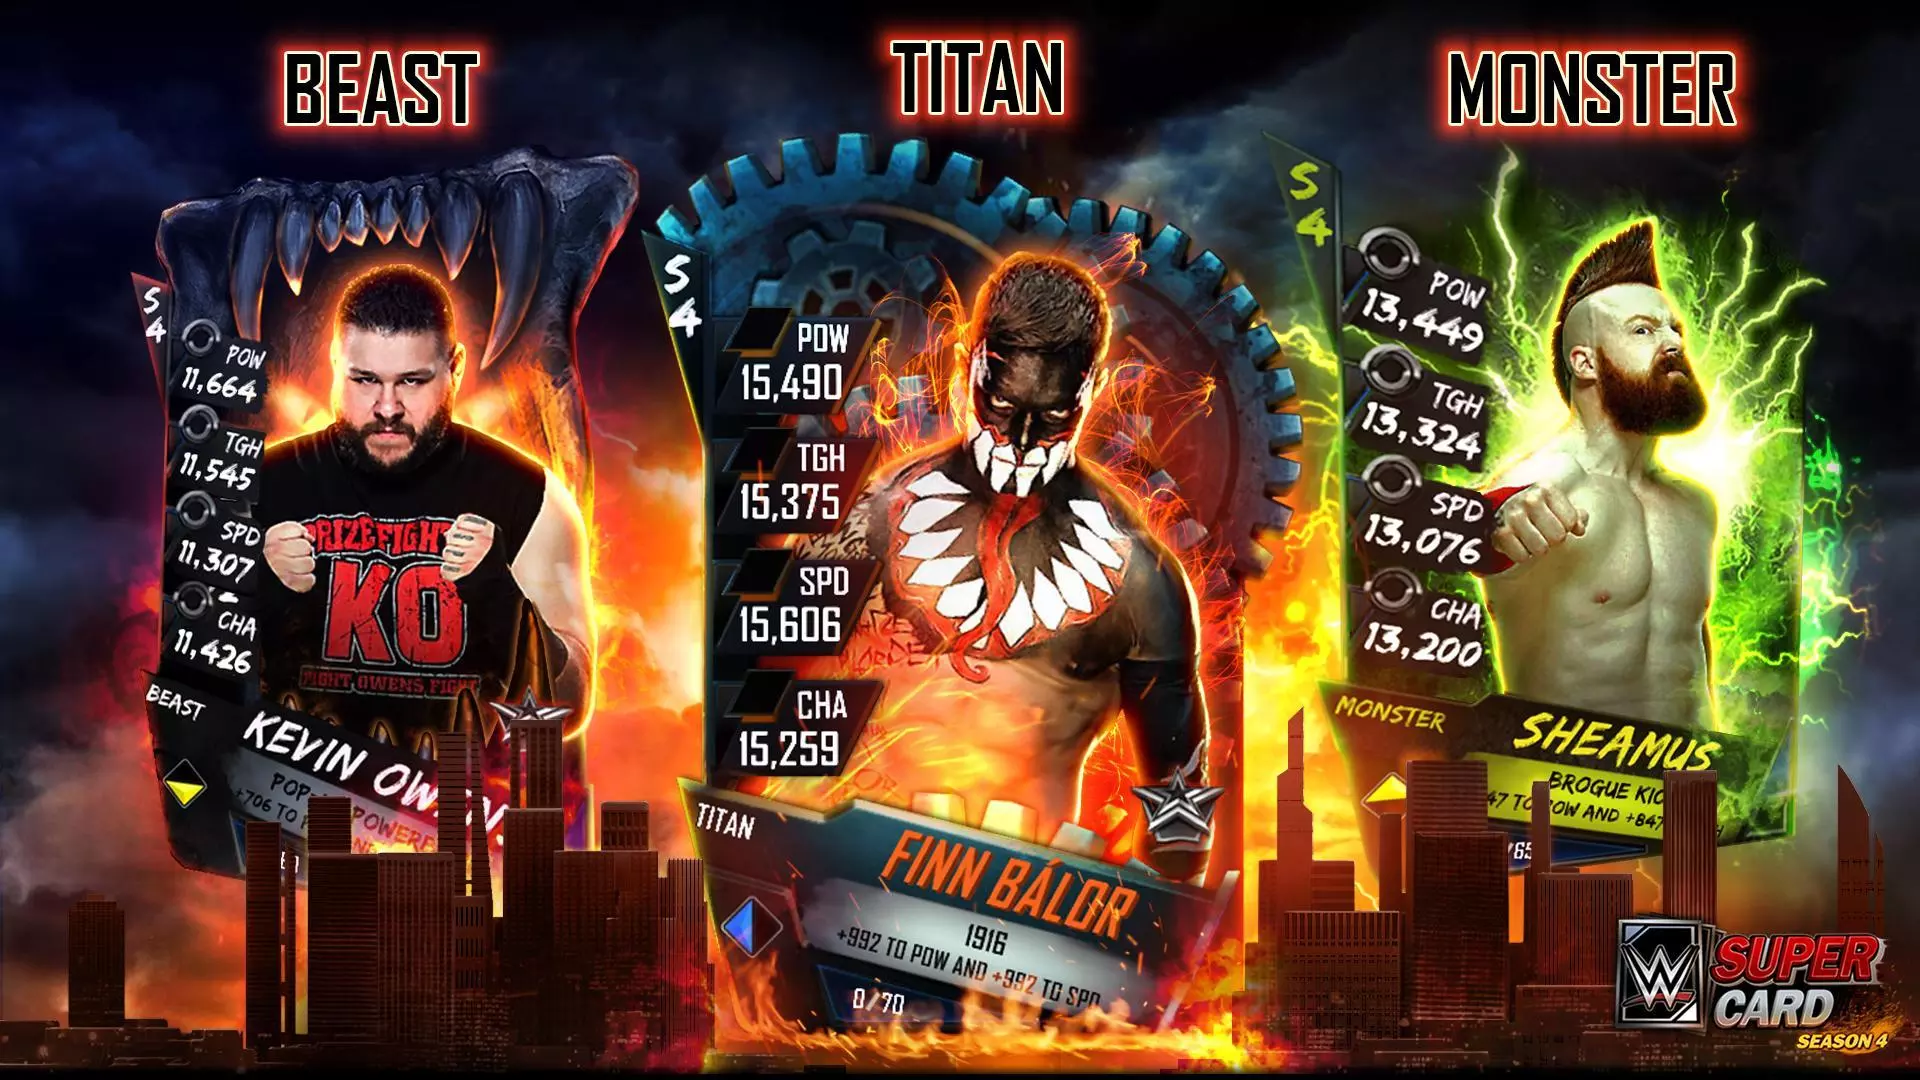 WWE SuperCard Season 4 - New Card Tiers Preview (Beast, Monster, Titan)